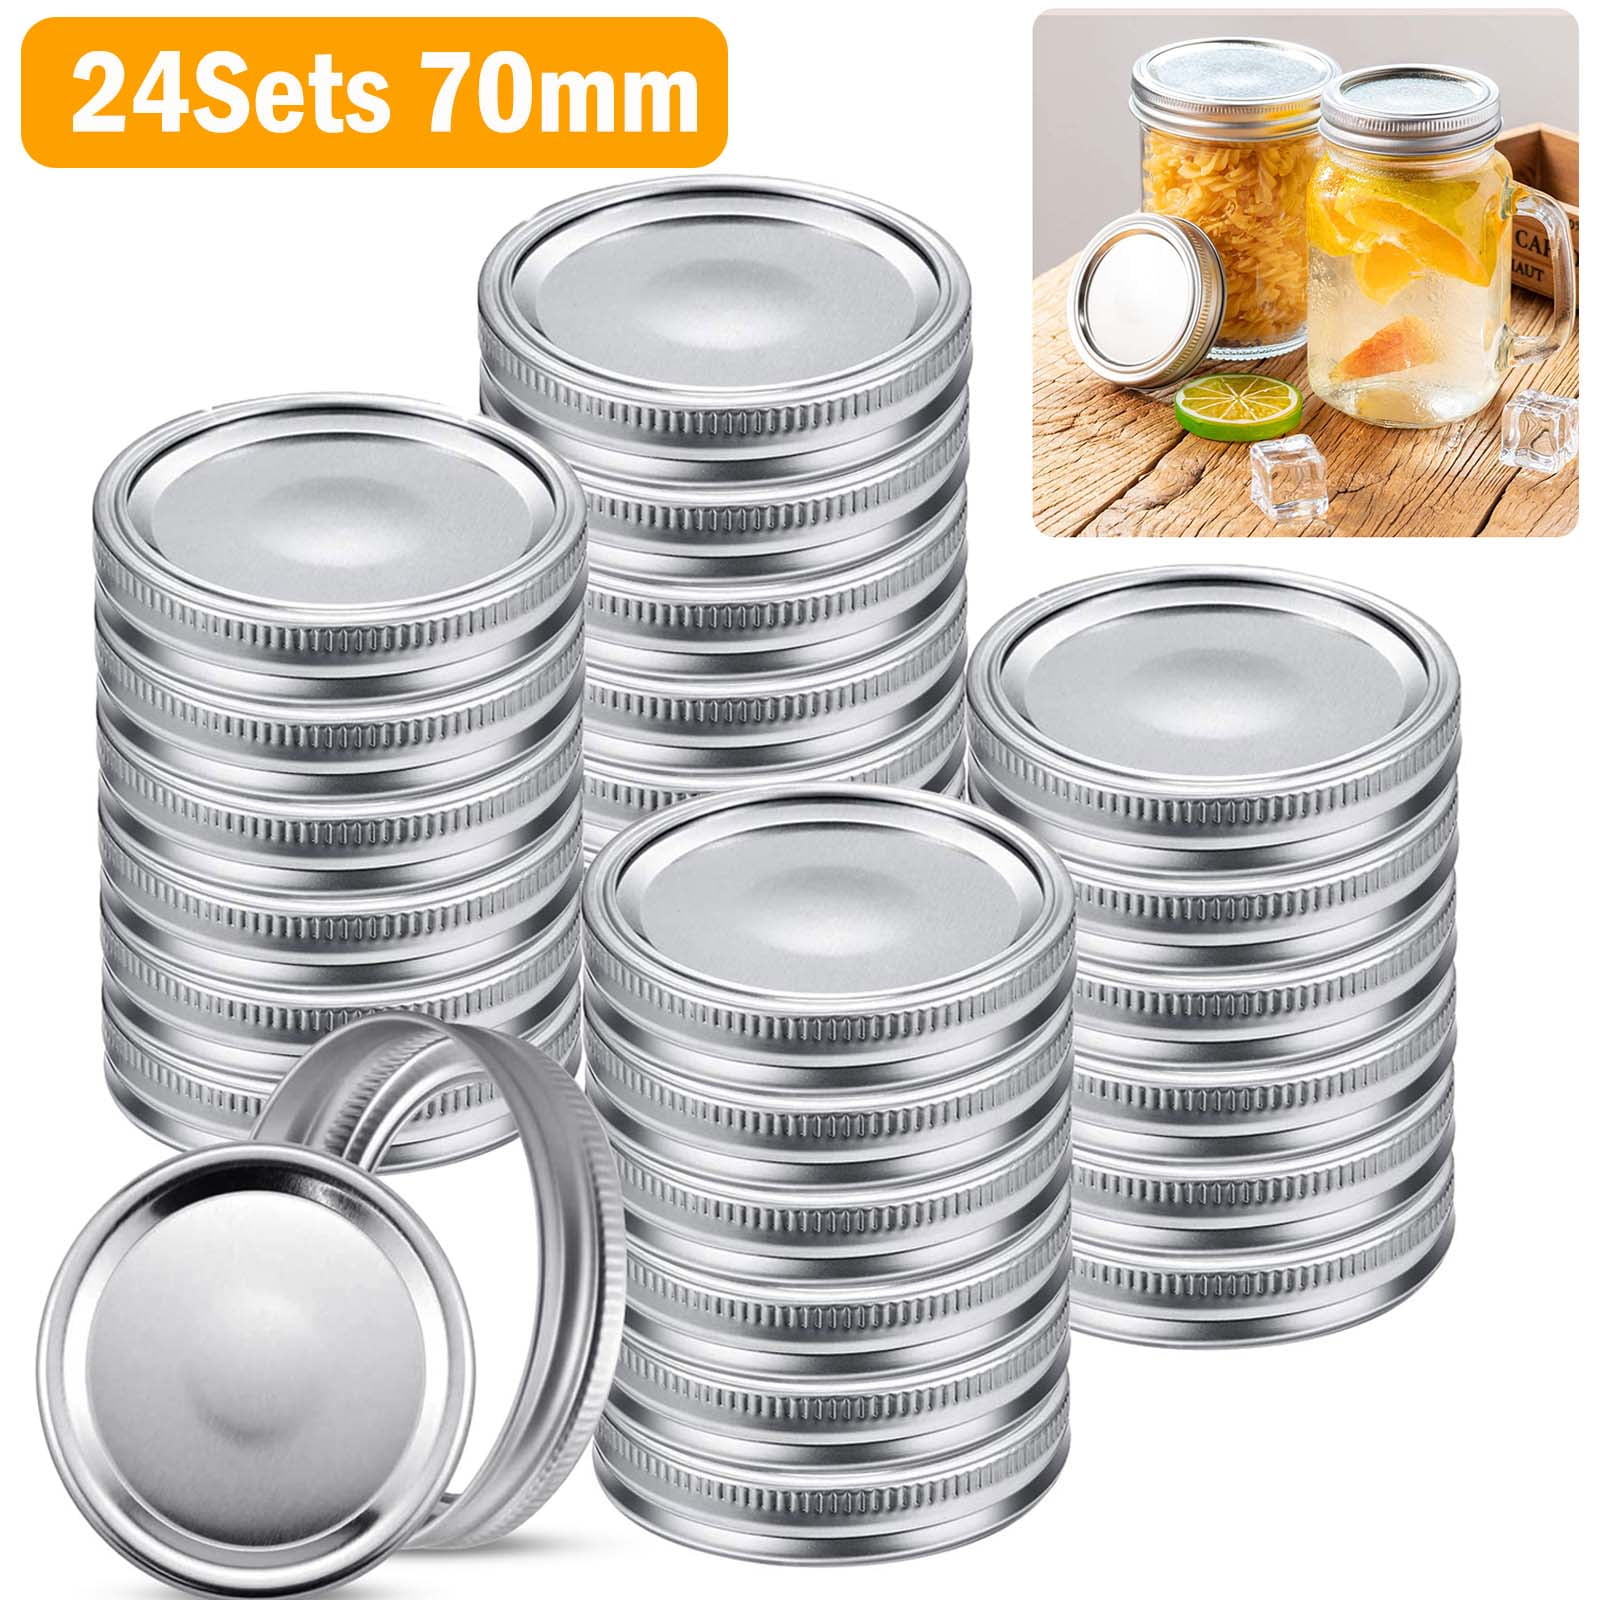 Stainless Steel Solid Caps Lid for Regular Wide Mouth Mason Ball Canning Jar Kit